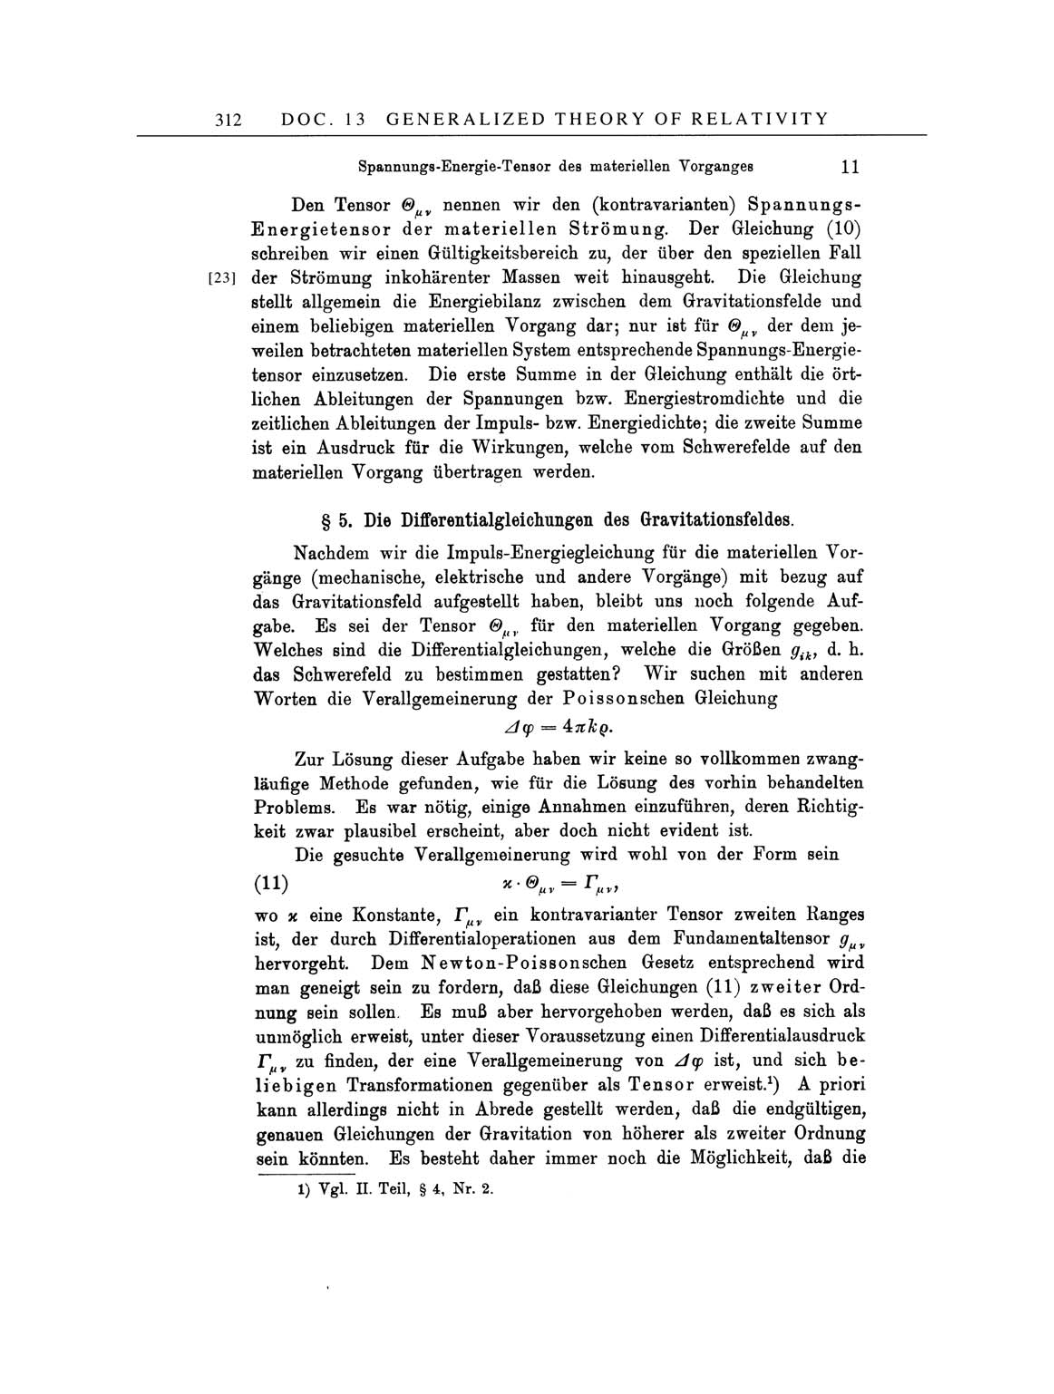 Volume 4: The Swiss Years: Writings 1912-1914 page 312